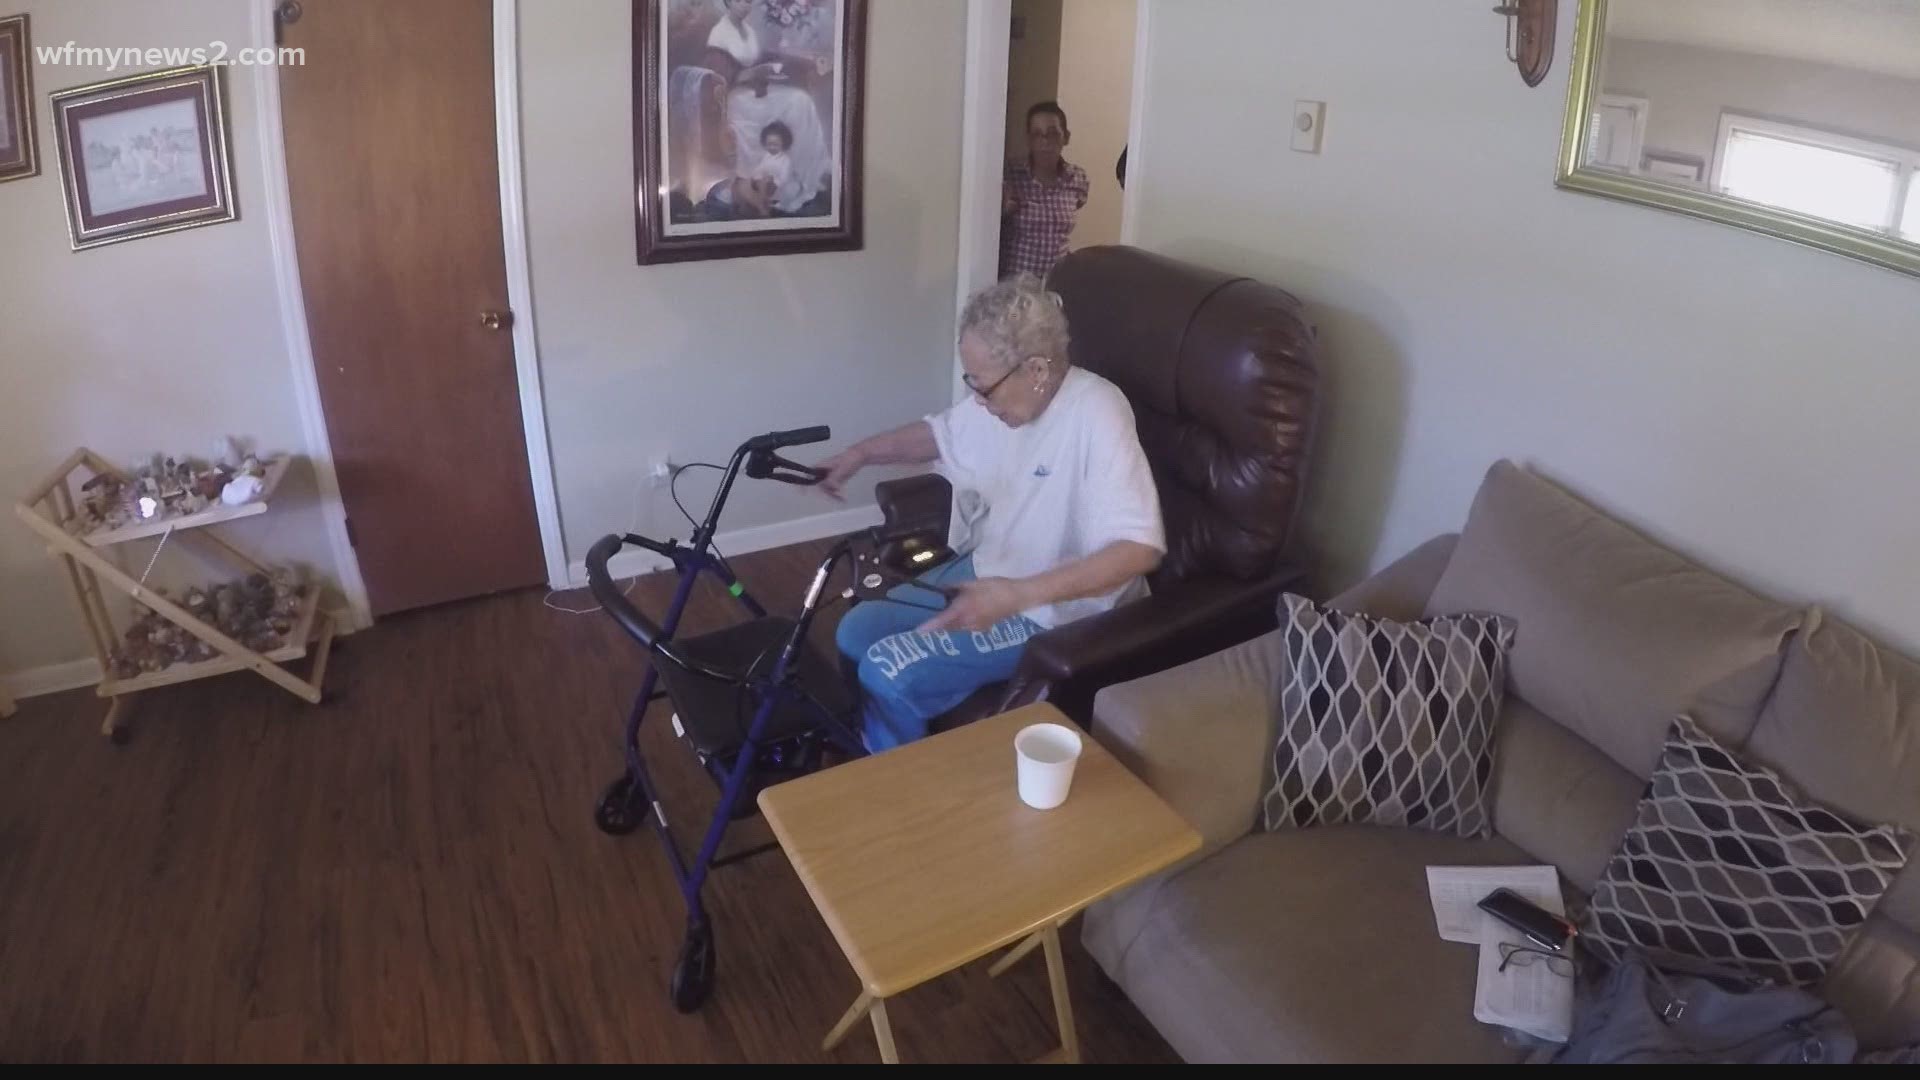 89-year-old Dorothy Godfrey has dementia and arthritis in both knees. Her remote-controlled chair helped her get around until it broke.